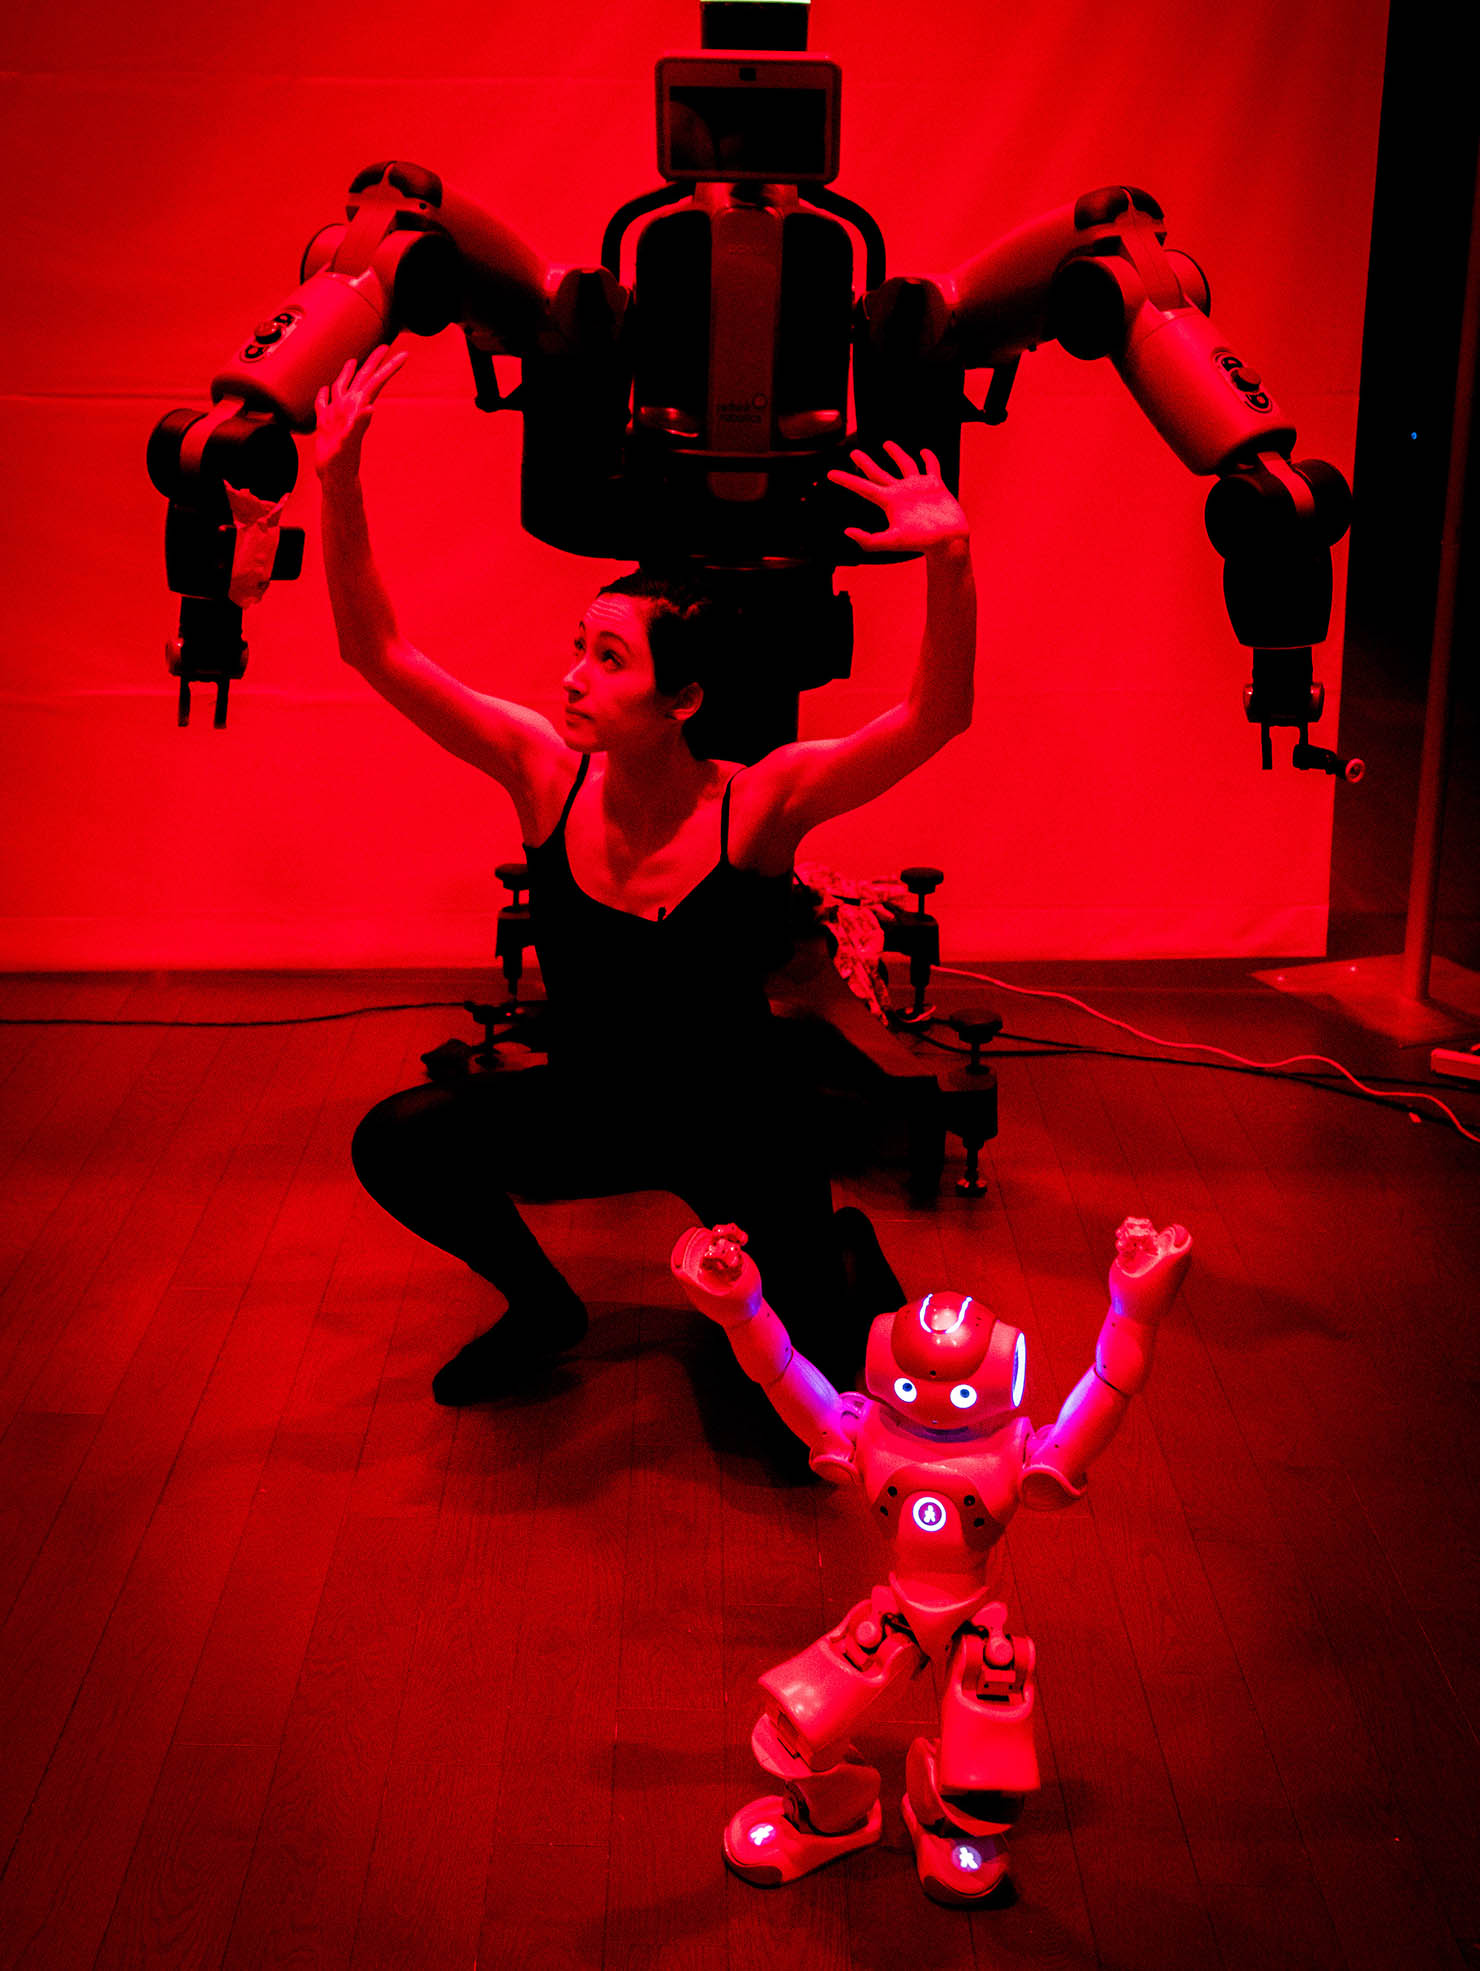 A woman dances with teo humaonoid robots, one small and one large, in a red lit room